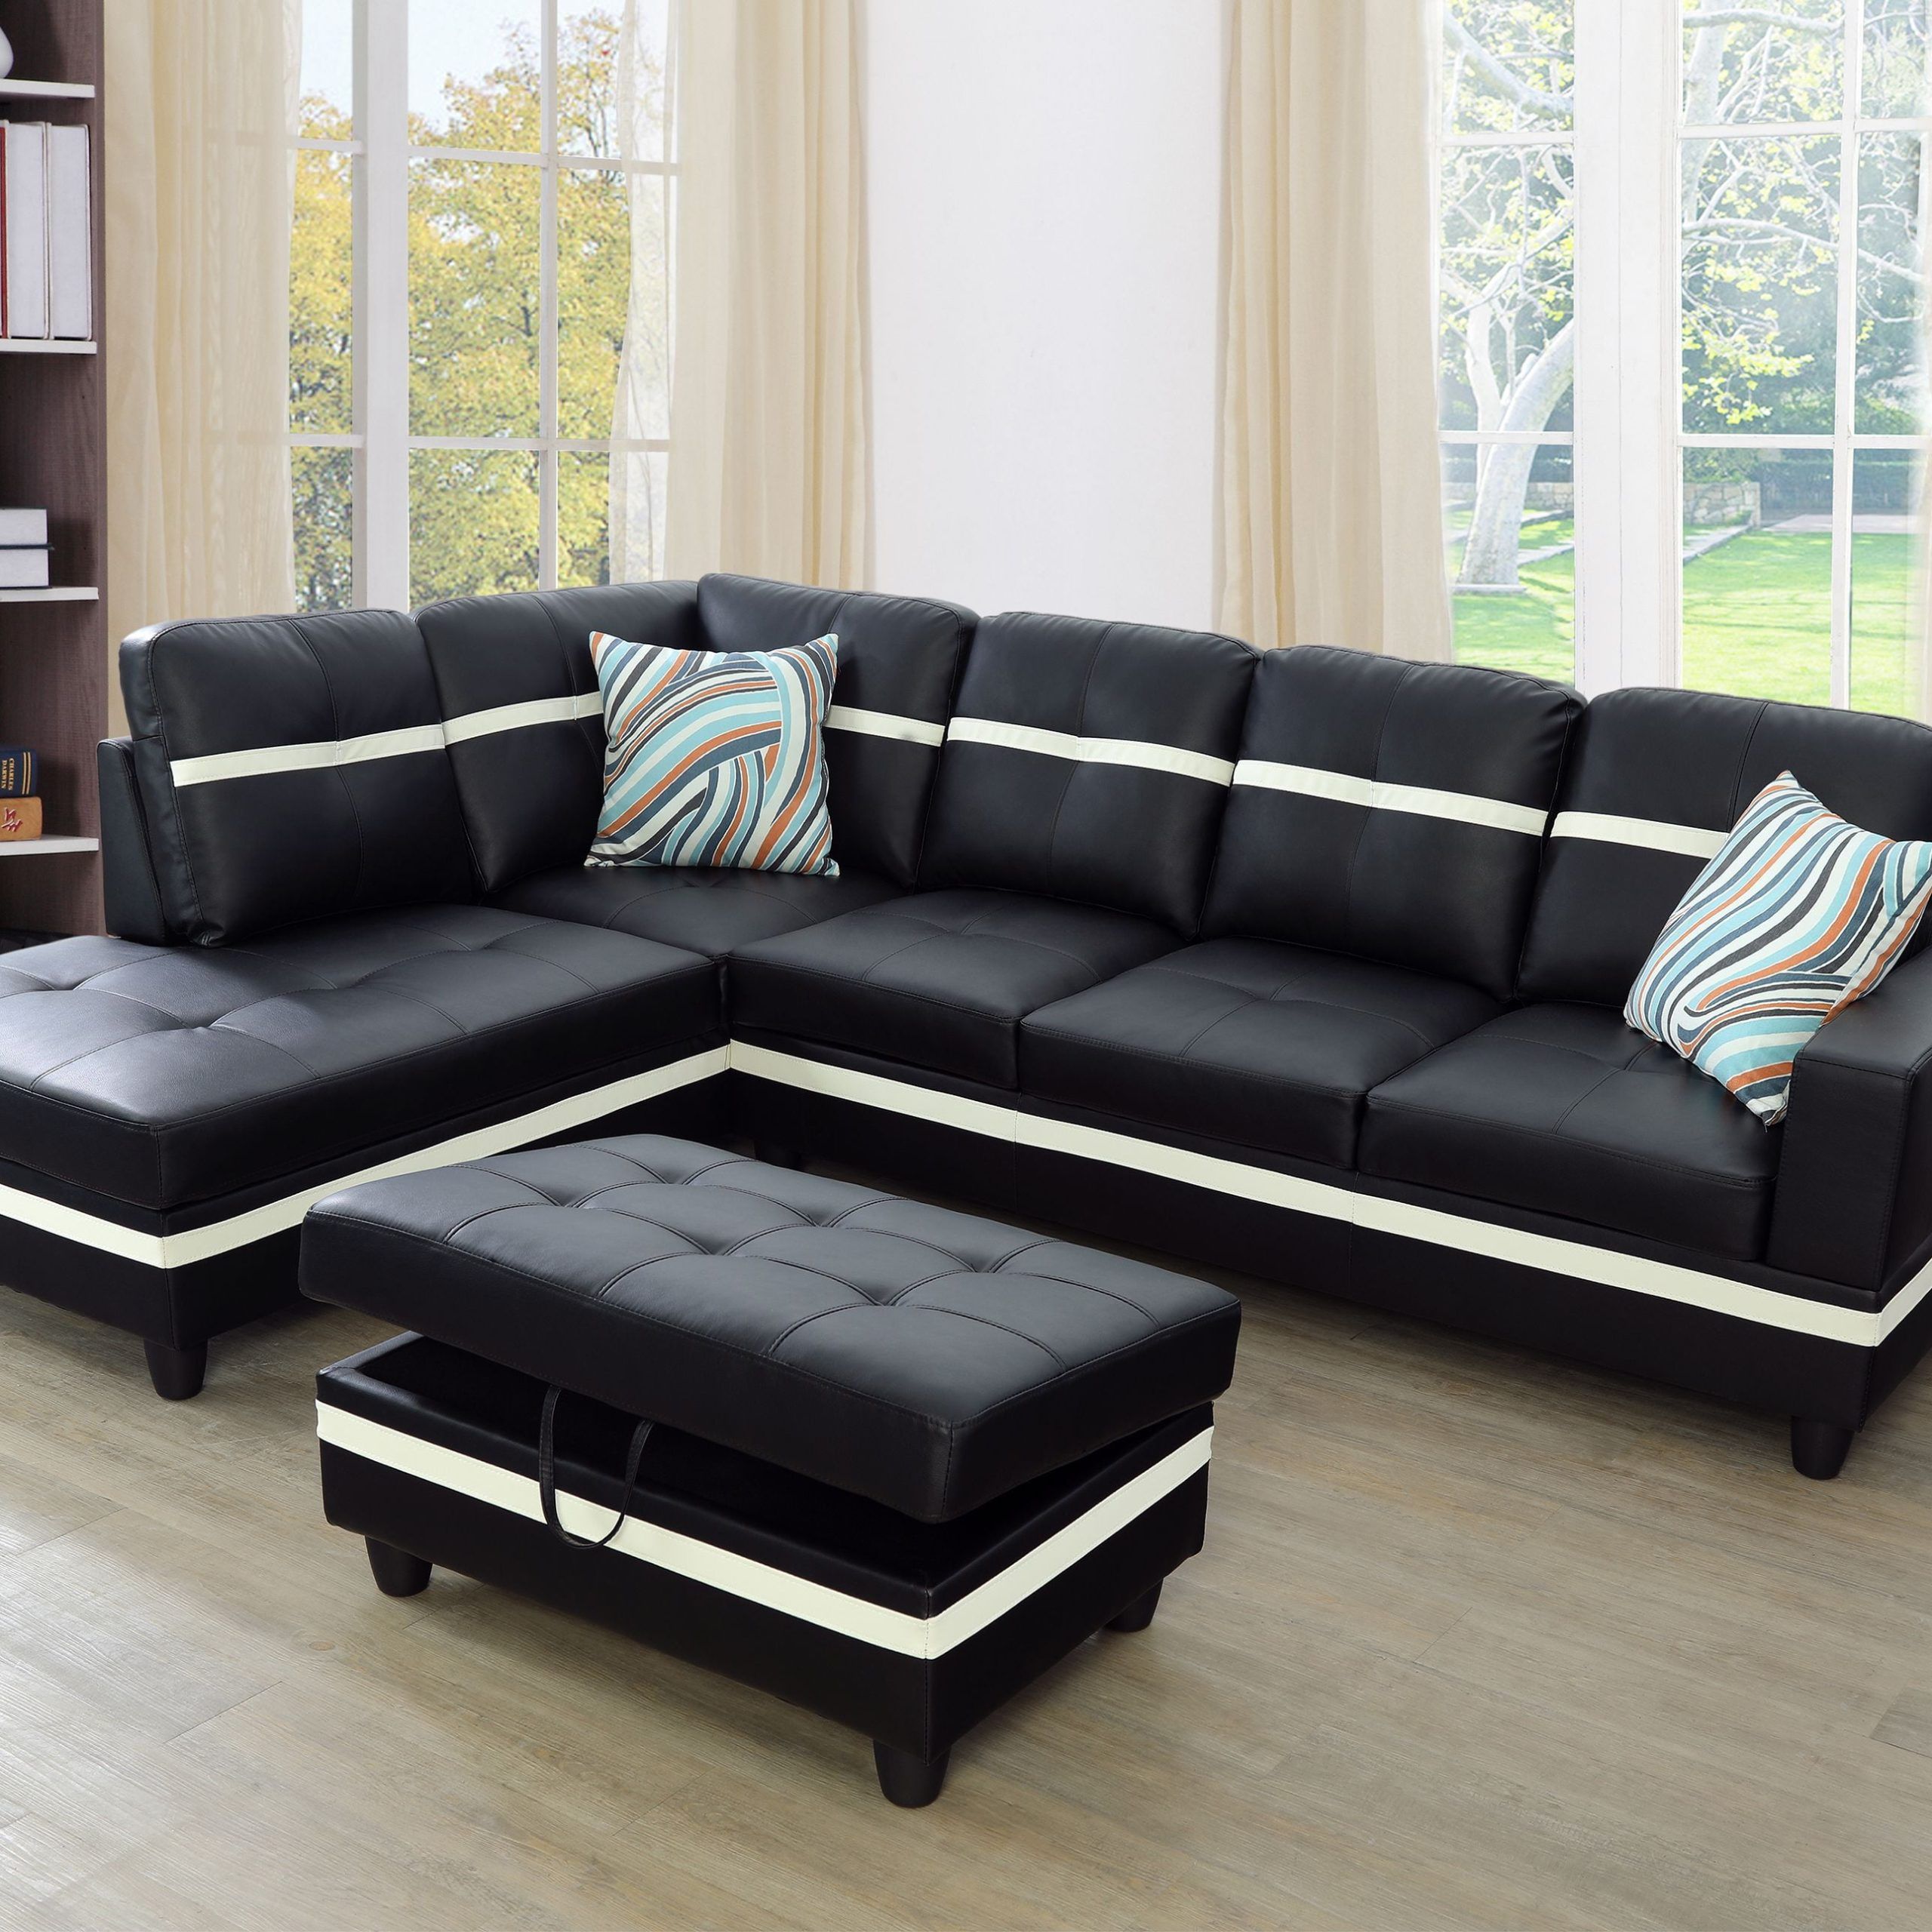 Aycp Furniture New Style  L Shape Sectional Sofa Set With Storage For Sofas With Ottomans (View 9 of 20)